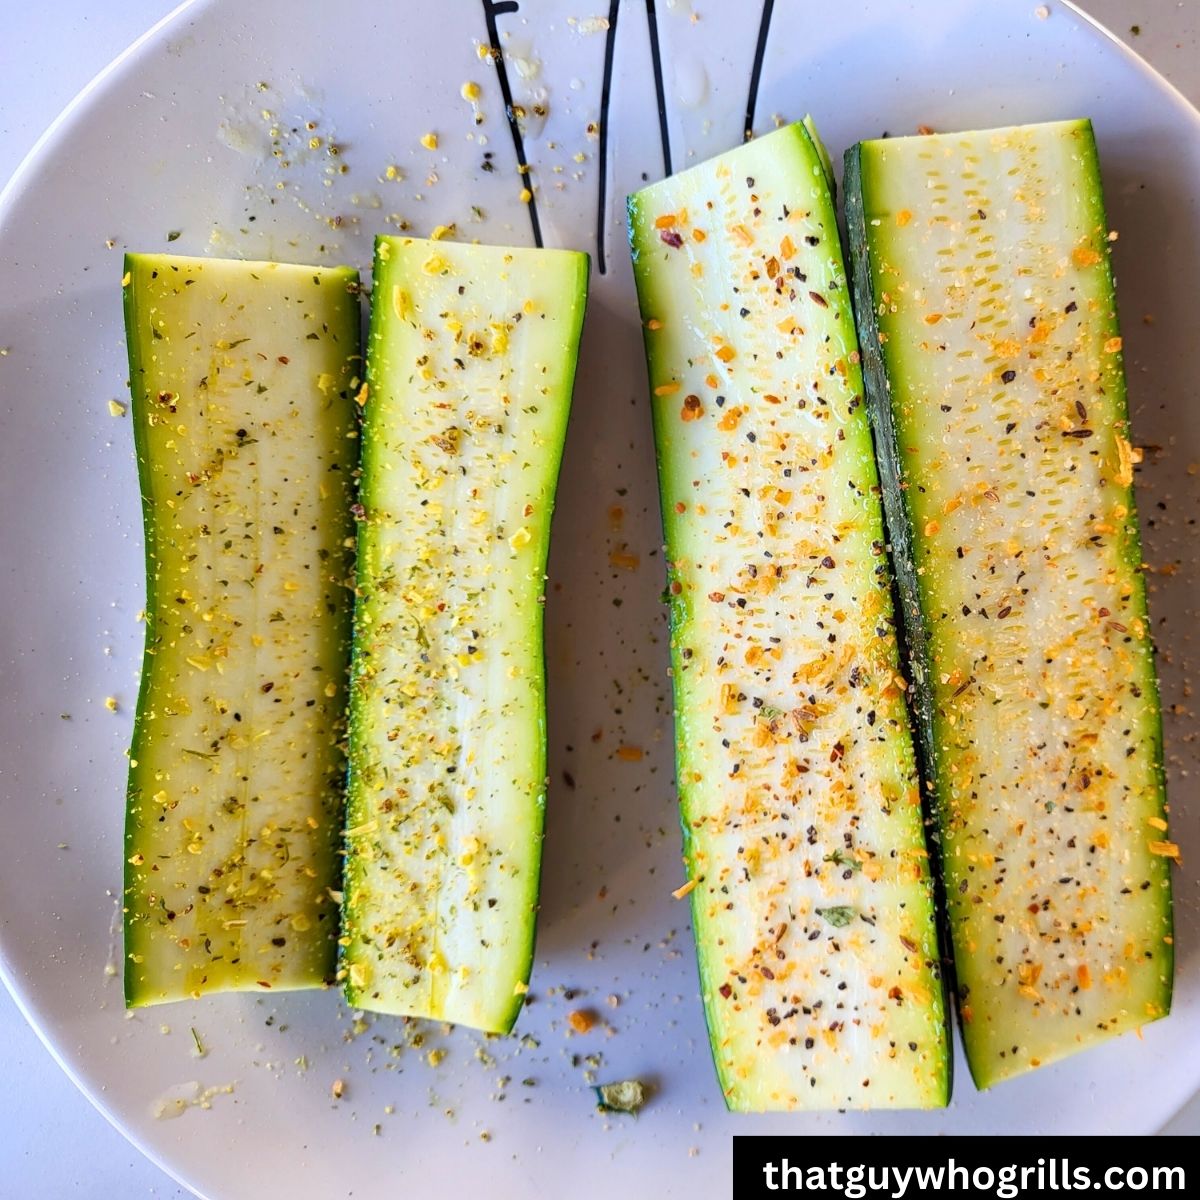 Sliced zucchini sliced on plate seasoned to grill